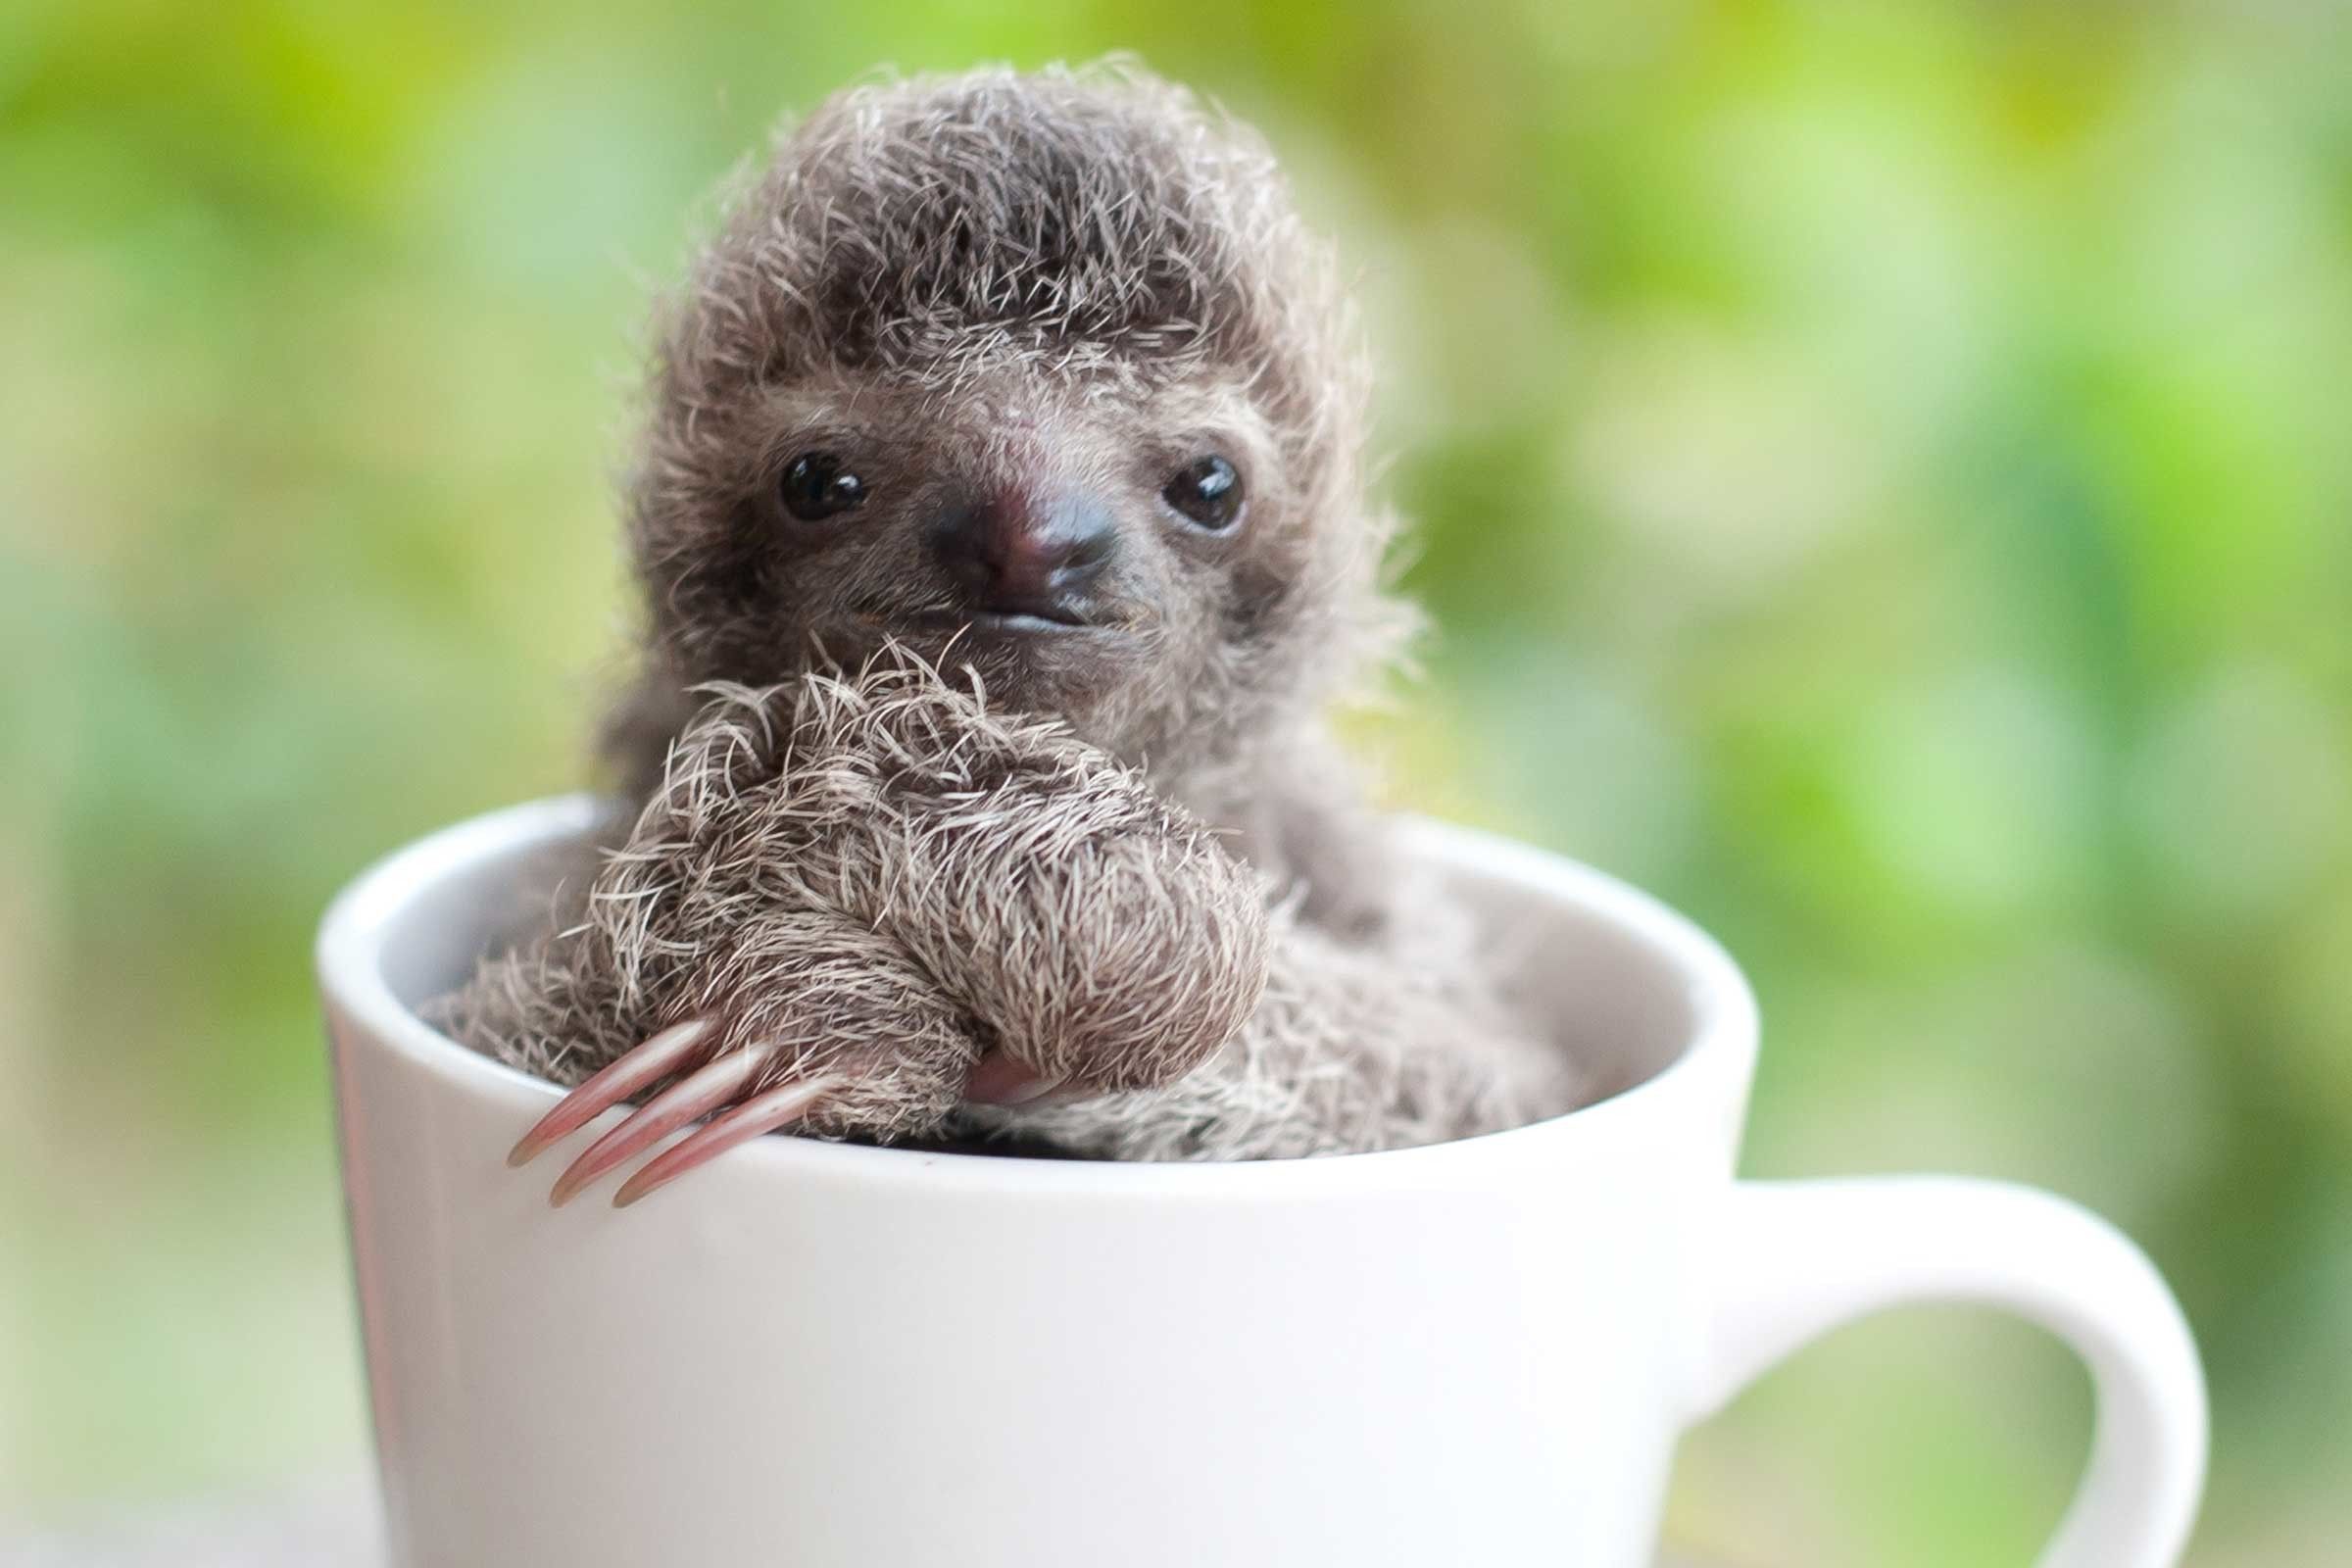 Cute Picture Of Baby Sloths Data Src Sloth In A Cup